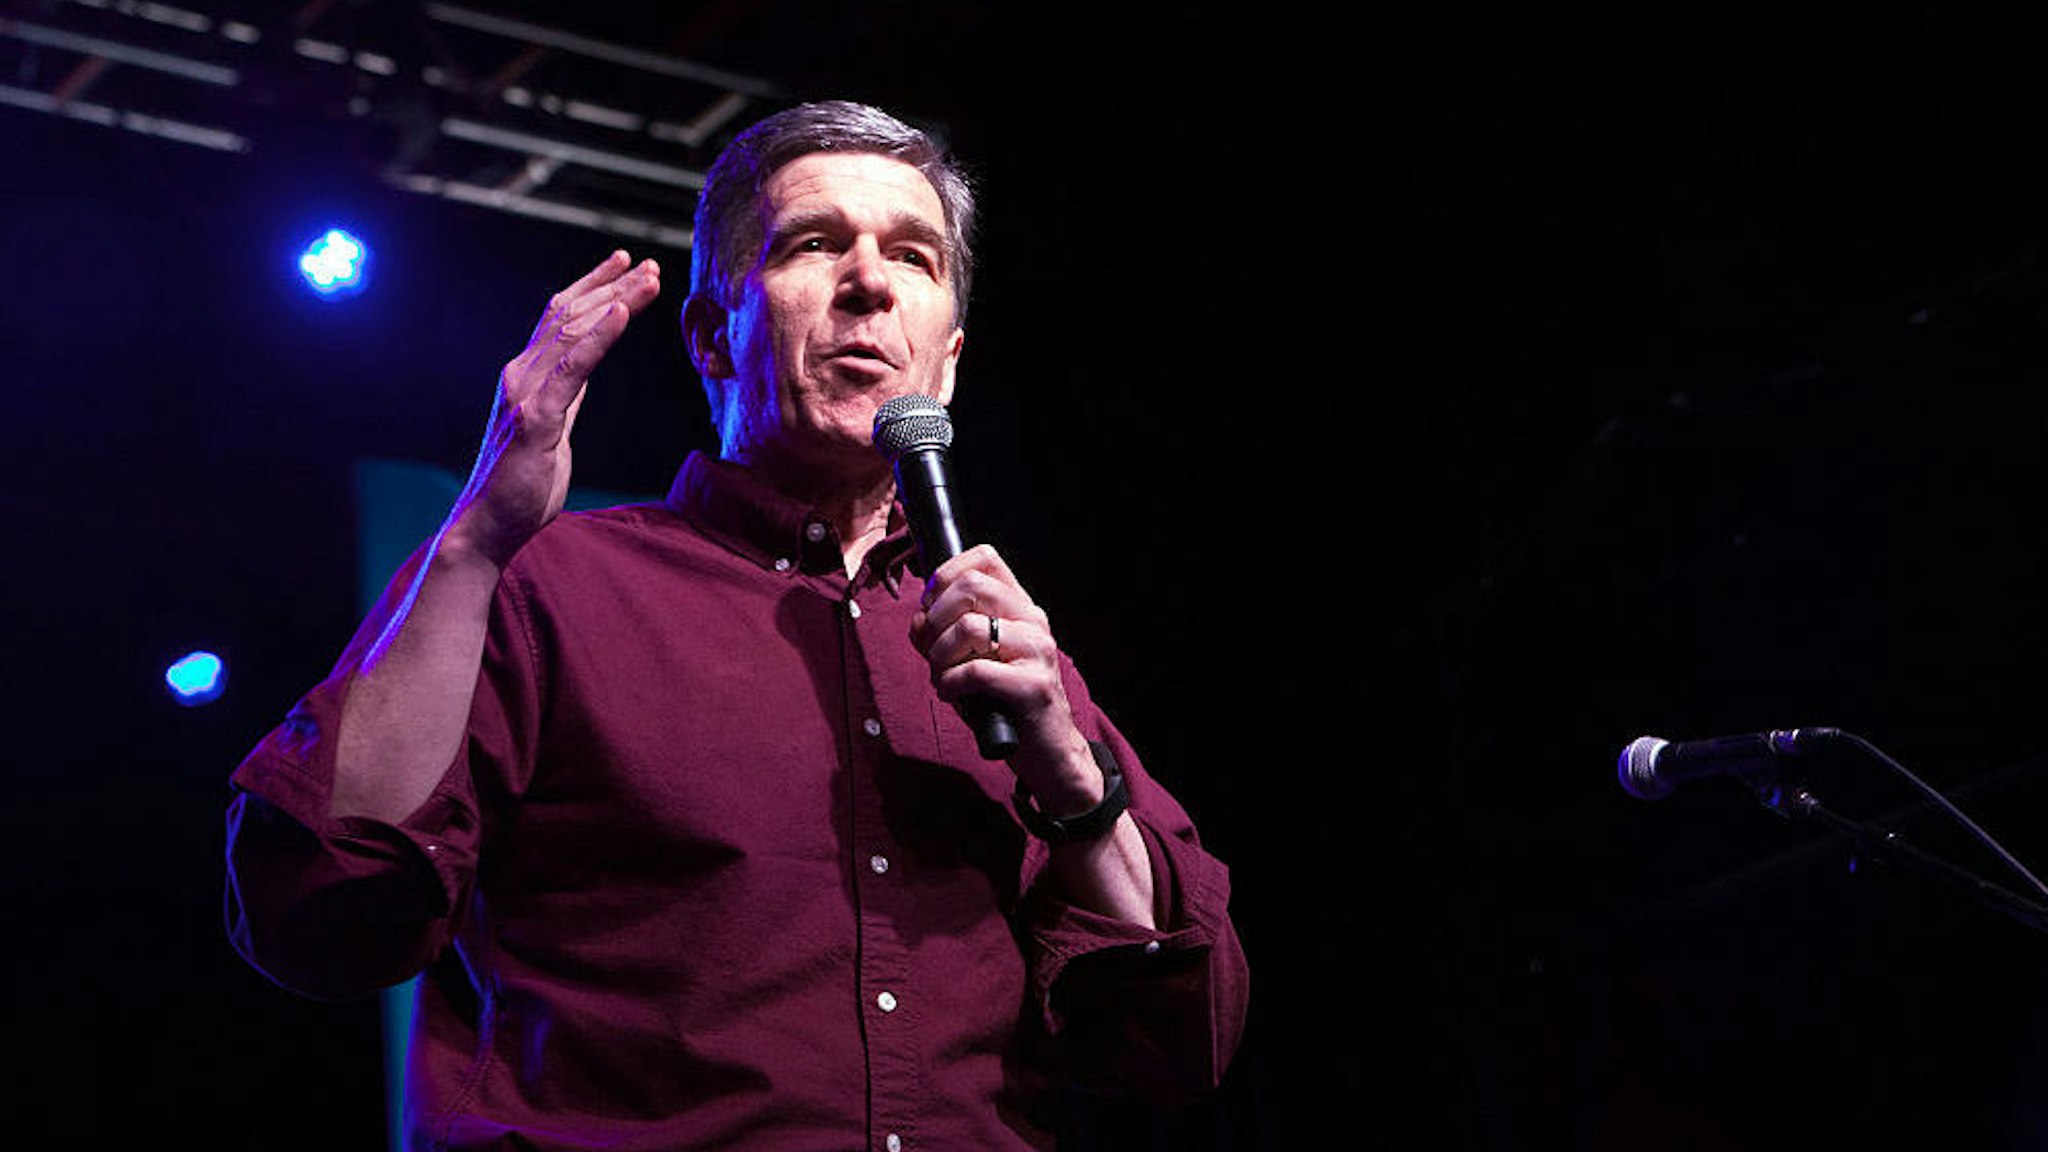 North Carolina gubernatorial candidate Roy Cooper speaks during Get Out the Vote at The Fillmore Charlotte on November 6, 2016 in Charlotte, North Carolina. (Photo by Jeff Hahne/Getty Images)